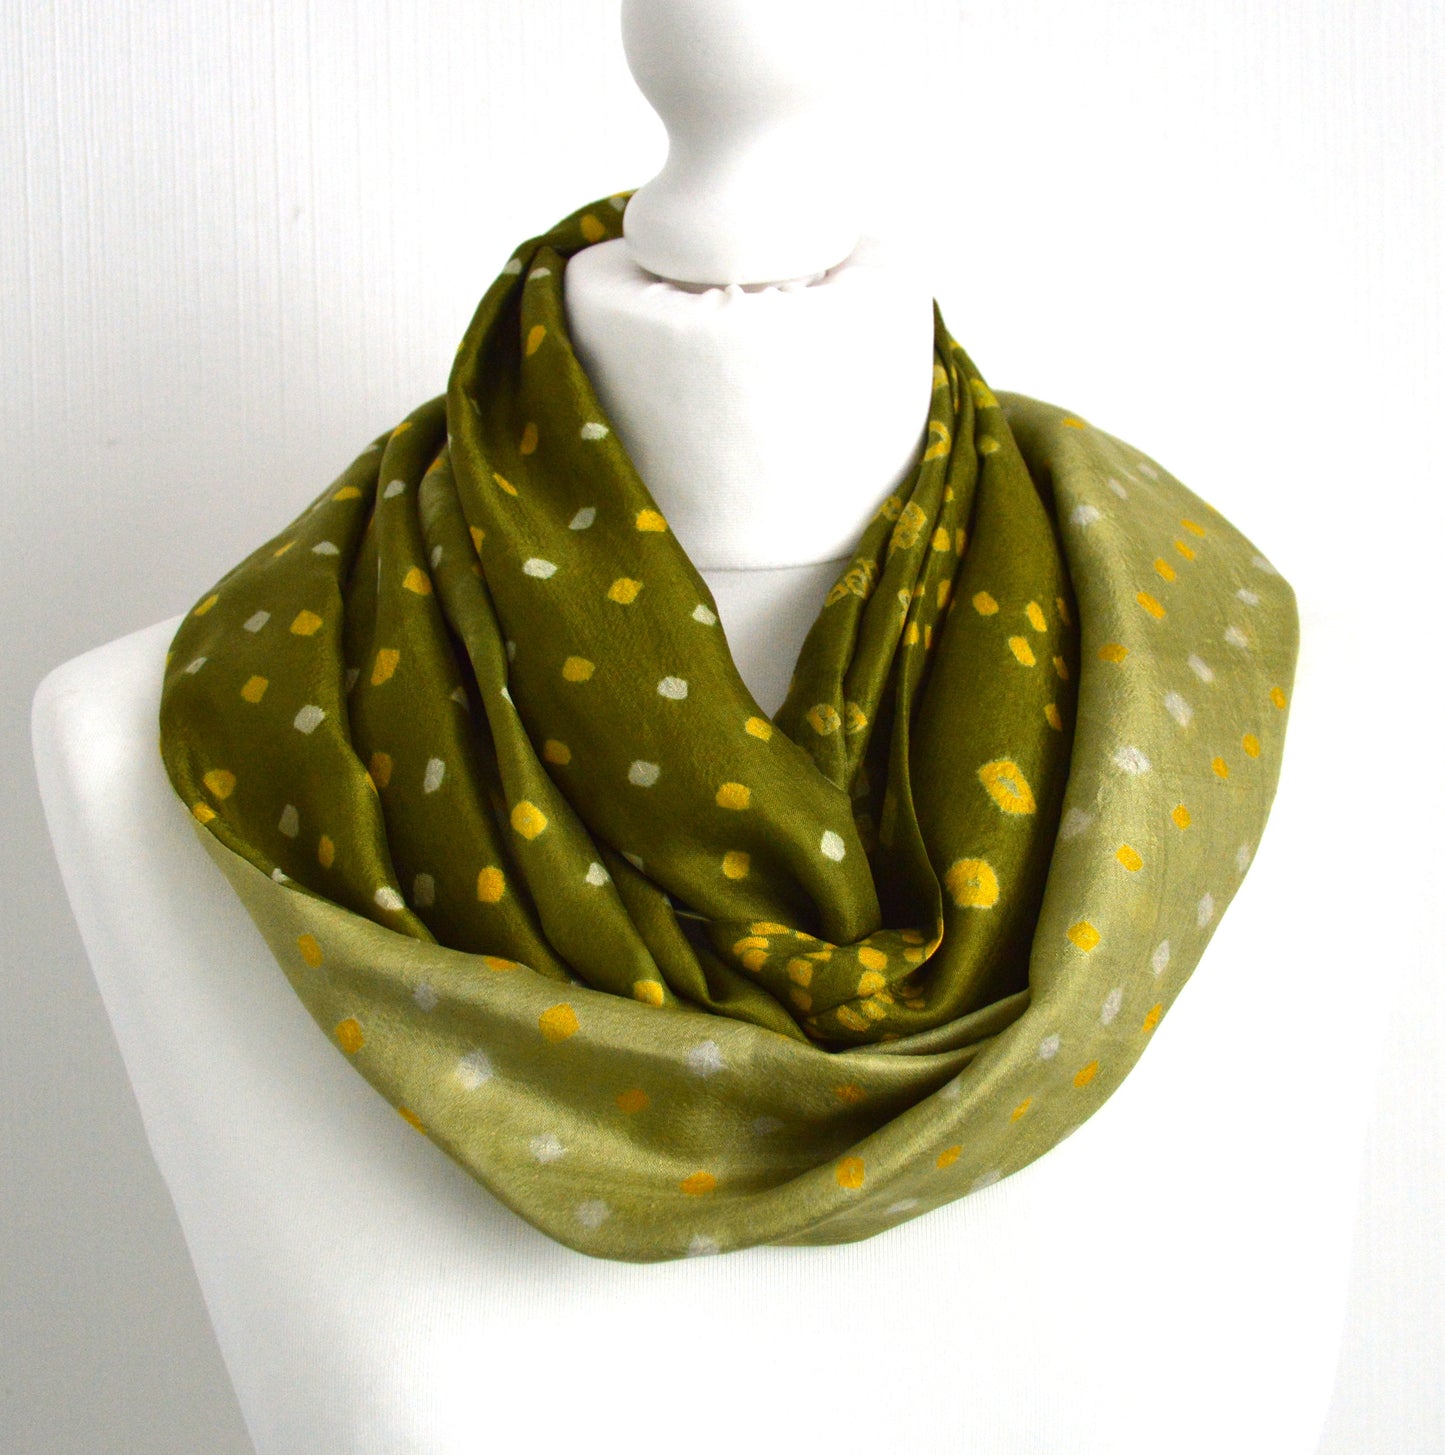 Olive Green Tie Dye upcycled Vintage Sari Silk Scarf - Hand Dyed Tie Dye Boho Scarf - Lightweight Handmade Eco Friendly Gift for Her Him